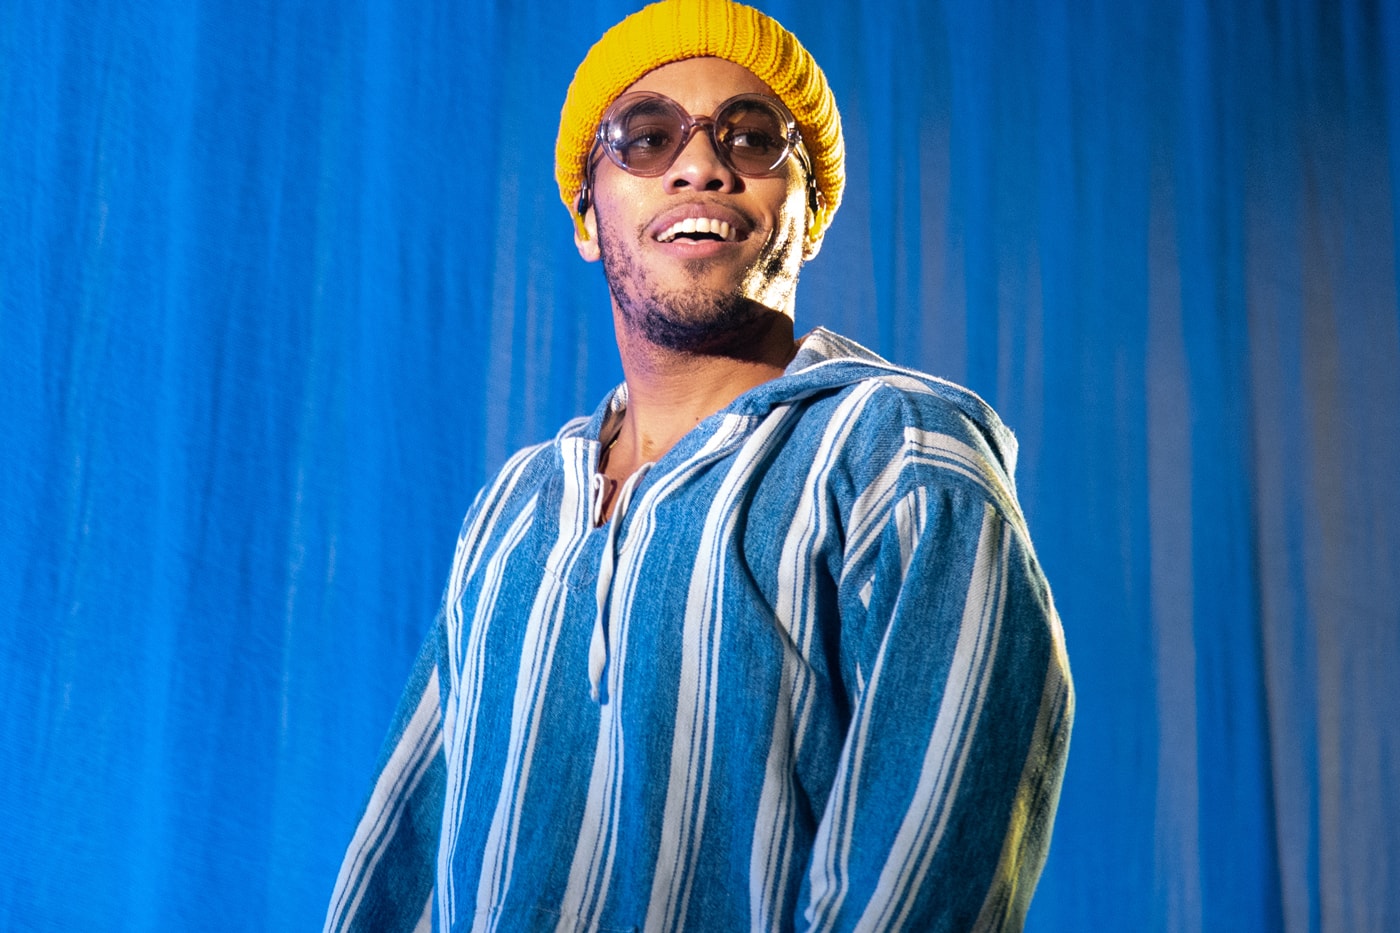 anderson-paak-brought-out-t-i-for-about-the-money-bring-em-out-at-coachella